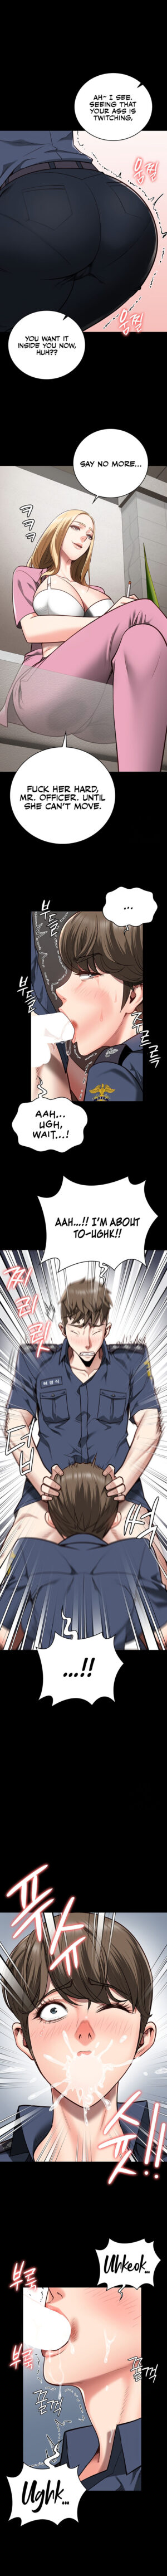 [Sung Min & In Jak] Locked Up (1-28) [English] [Omega Scans] [Ongoing]